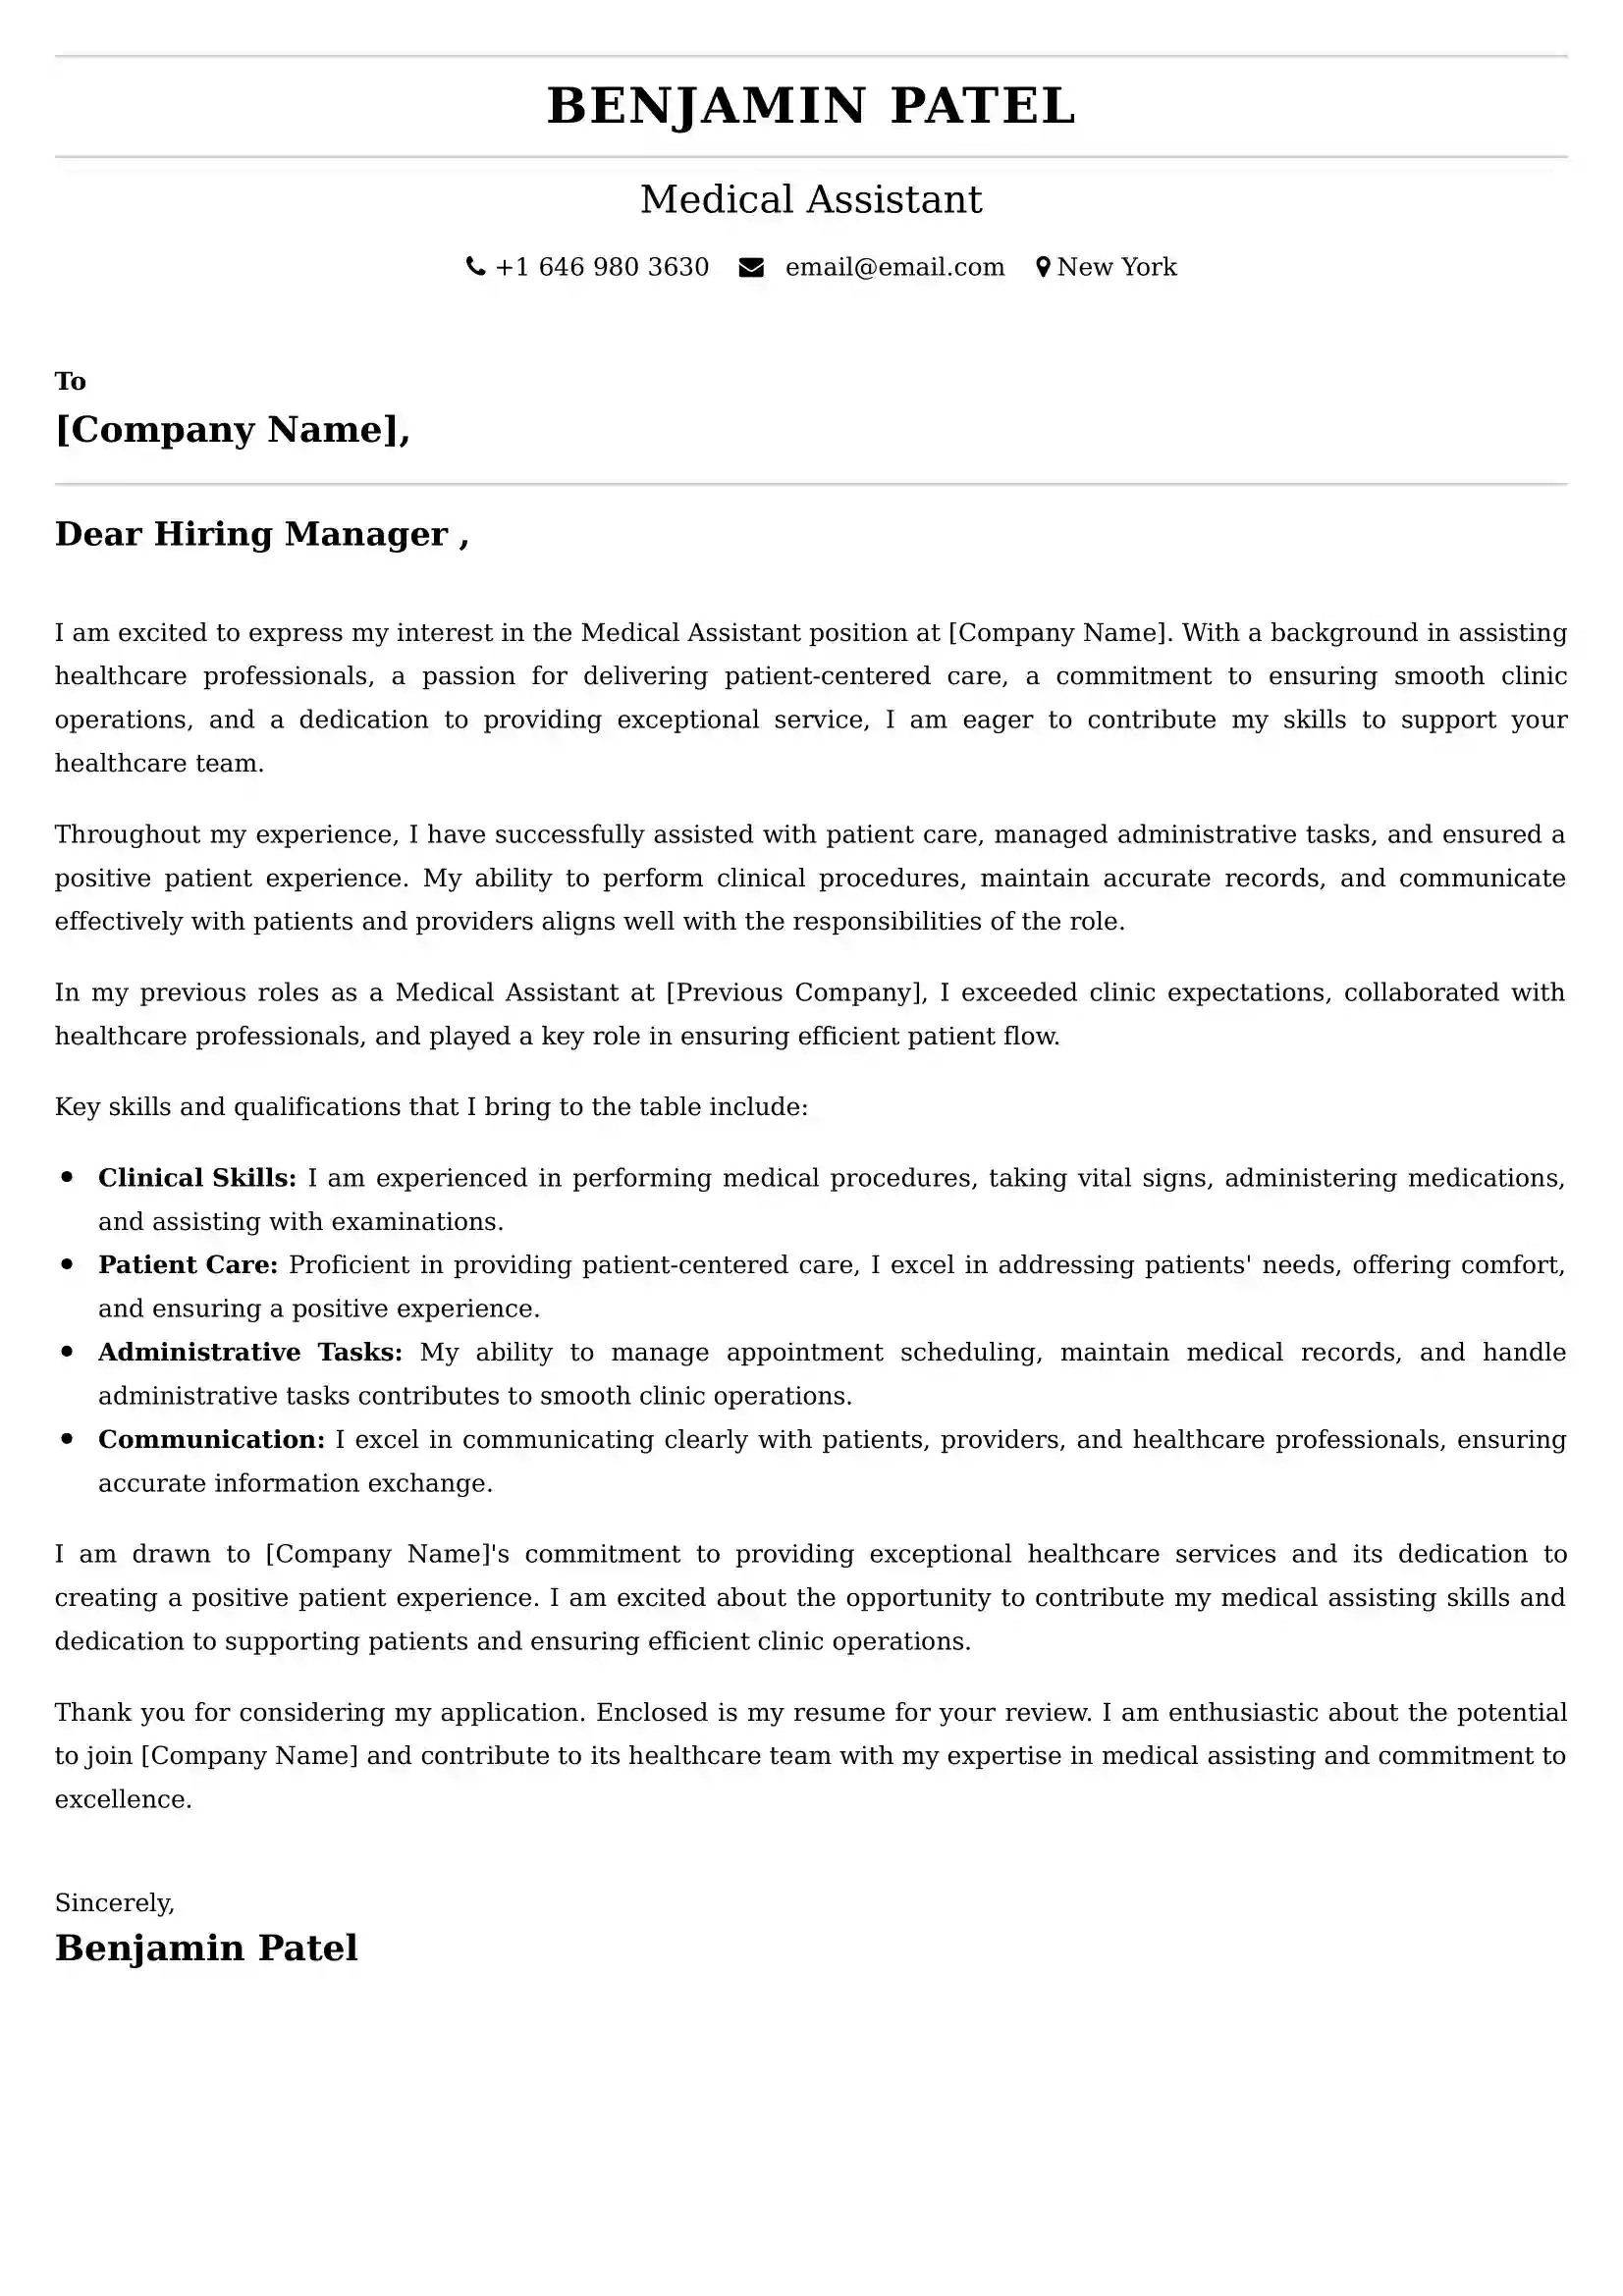 Medical Assistant Cover Letter Examples -Latest Brazilian Templates